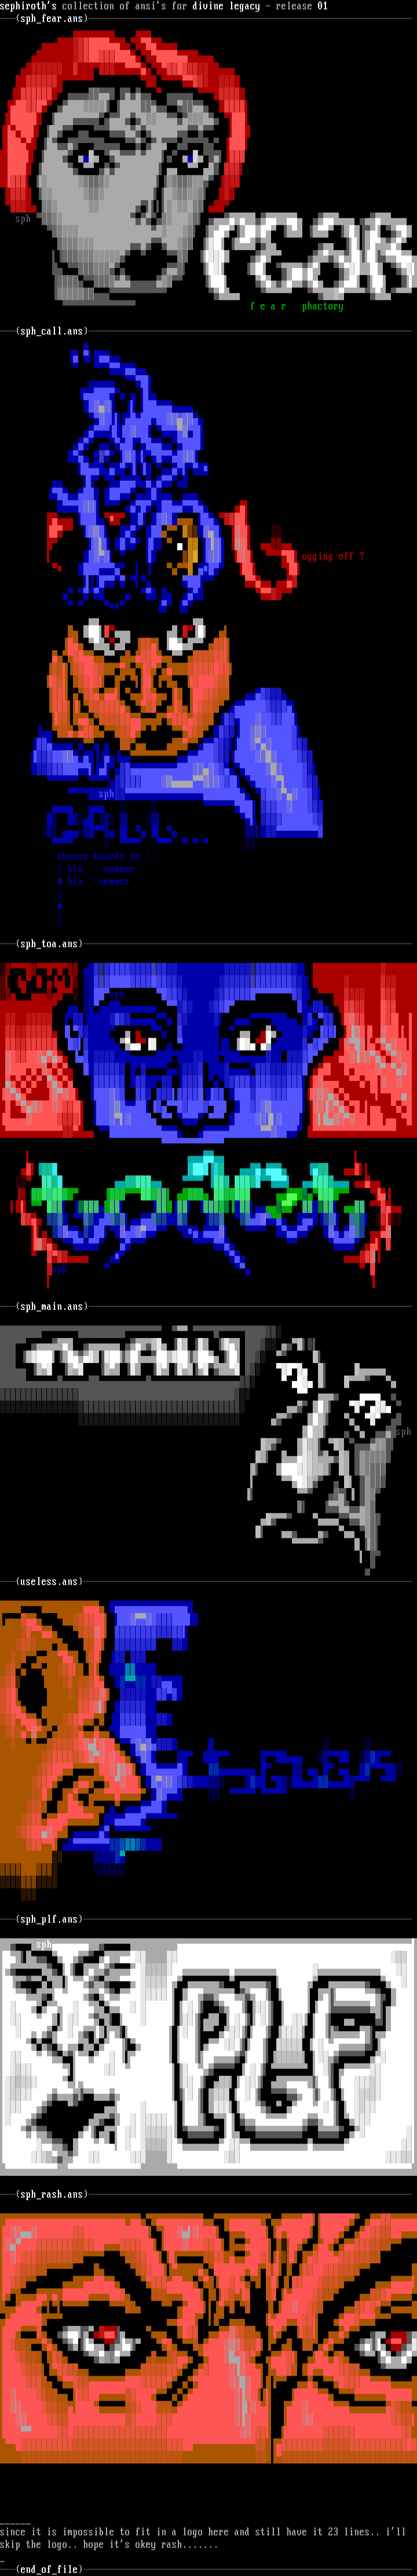 ansi collection - 01 by sephorith